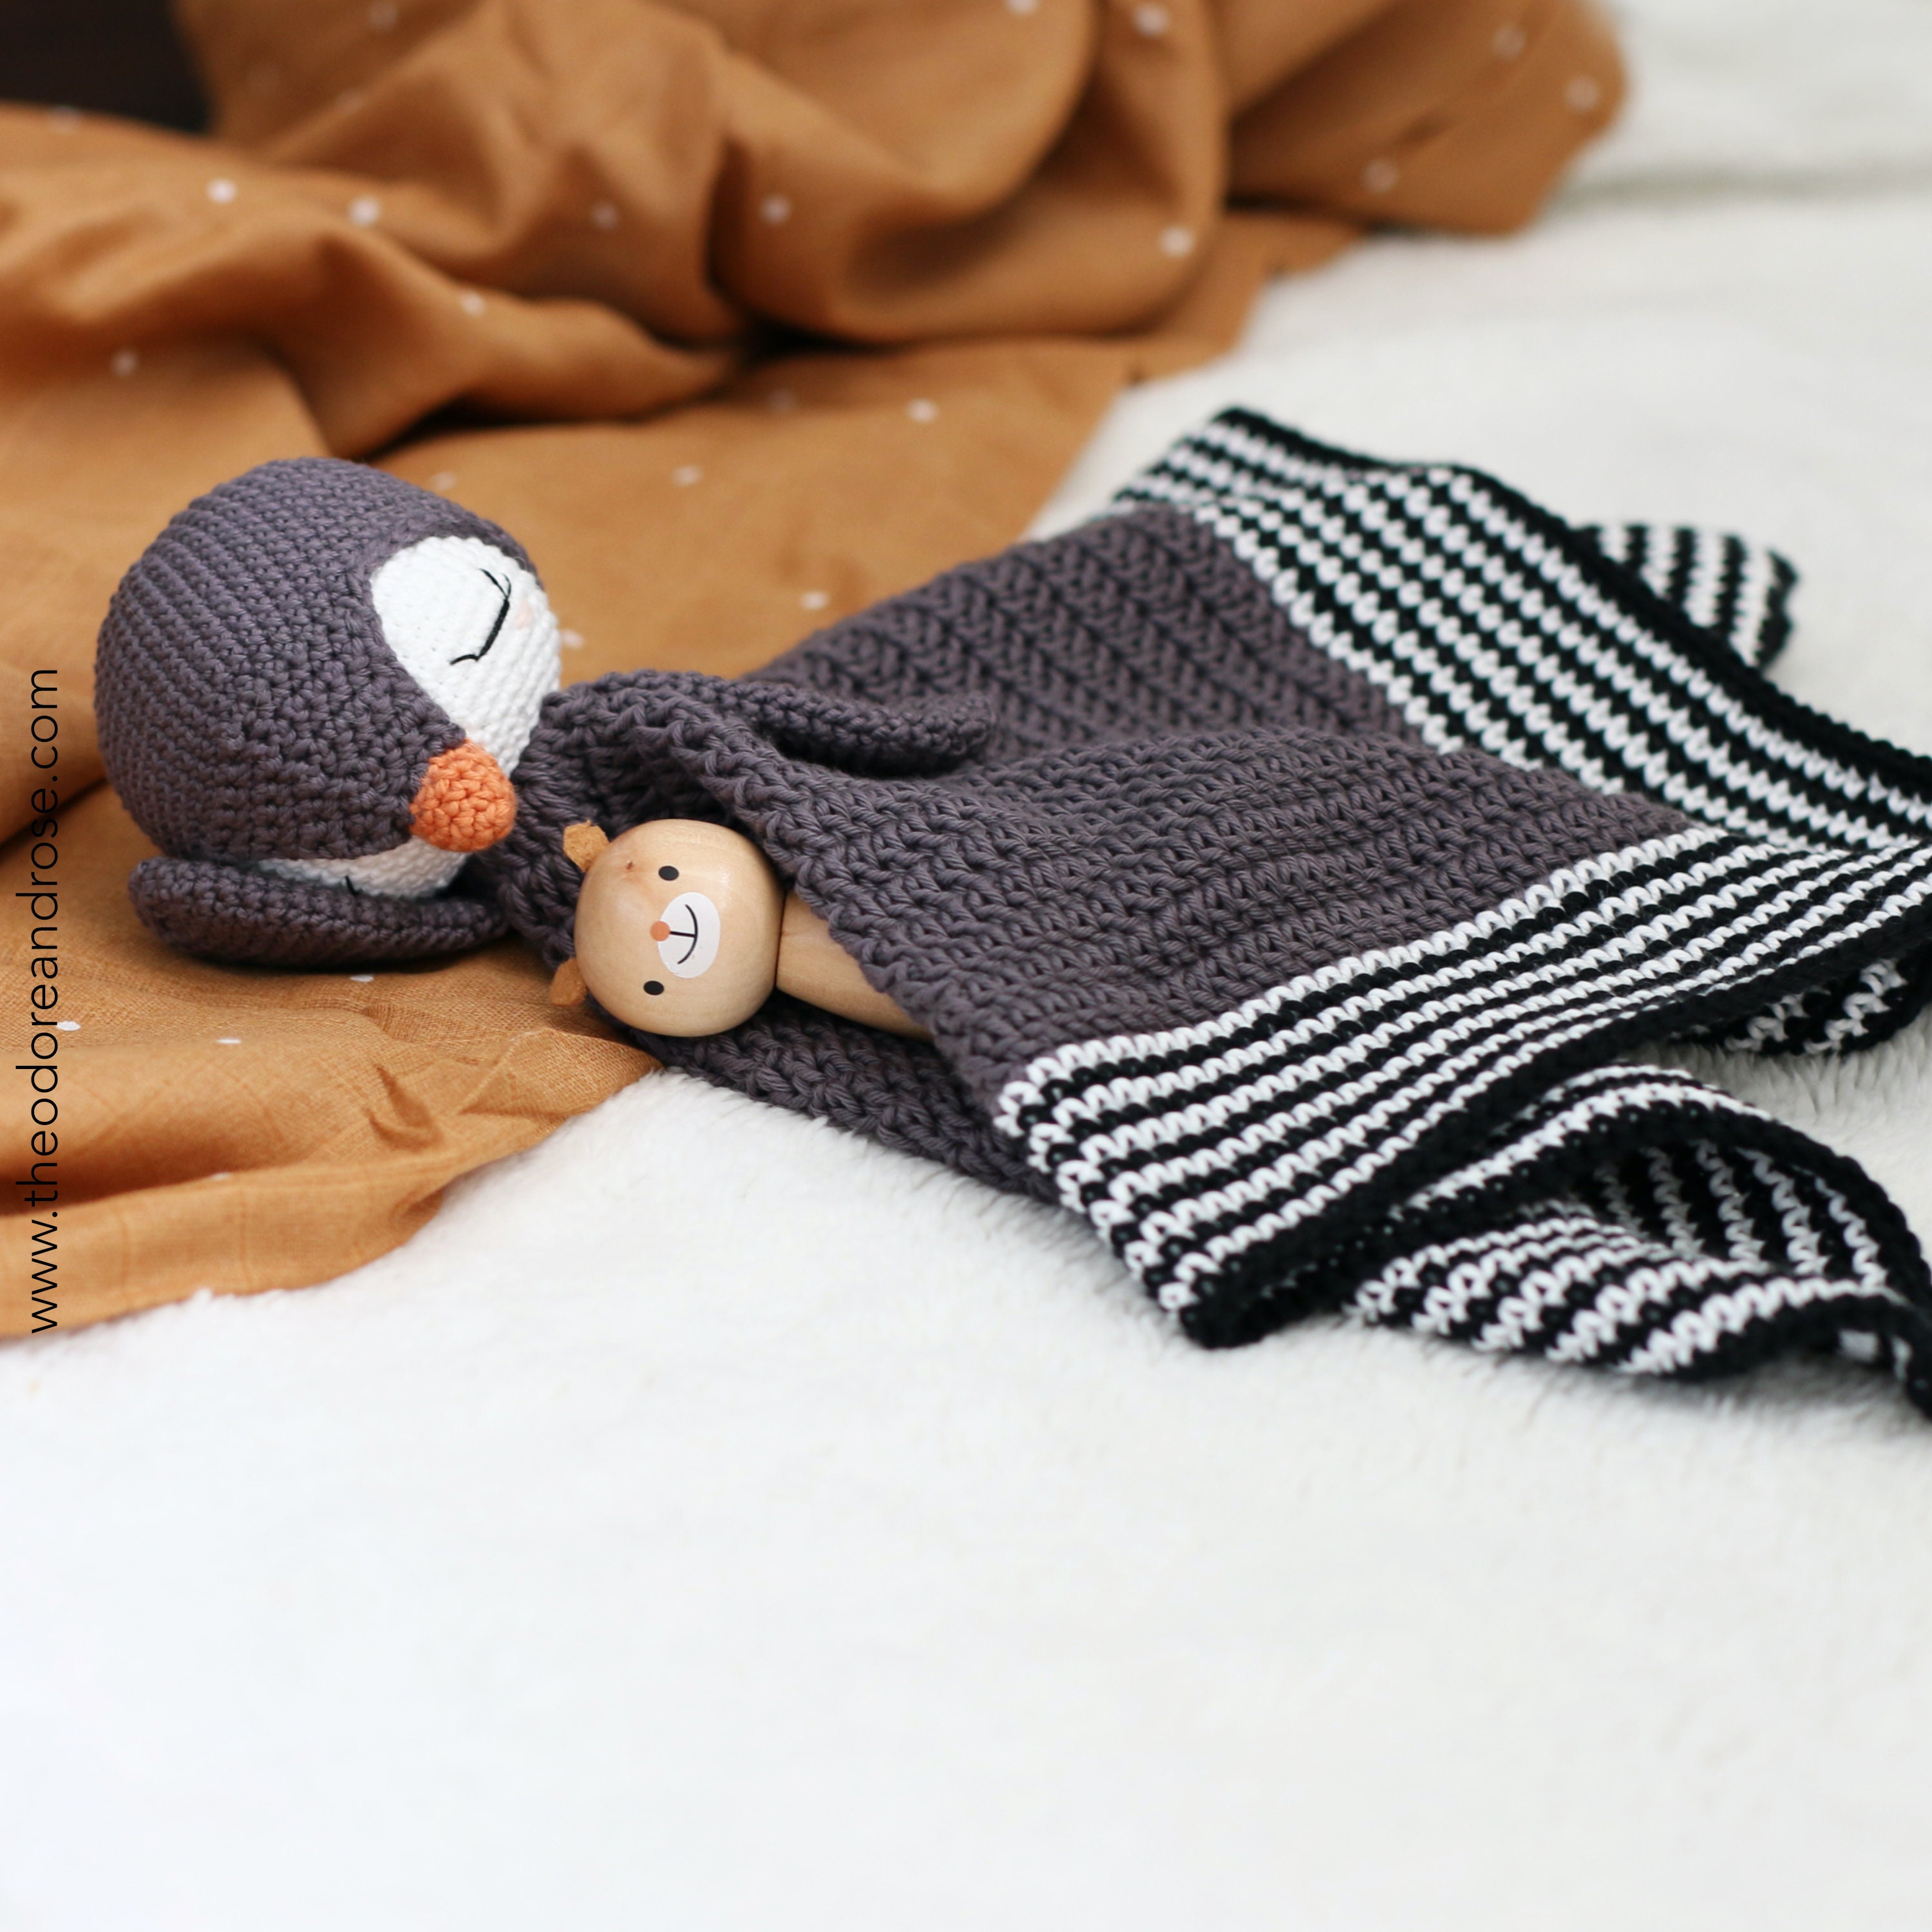 THNLife - Chilly the Penguin Crochet Pattern